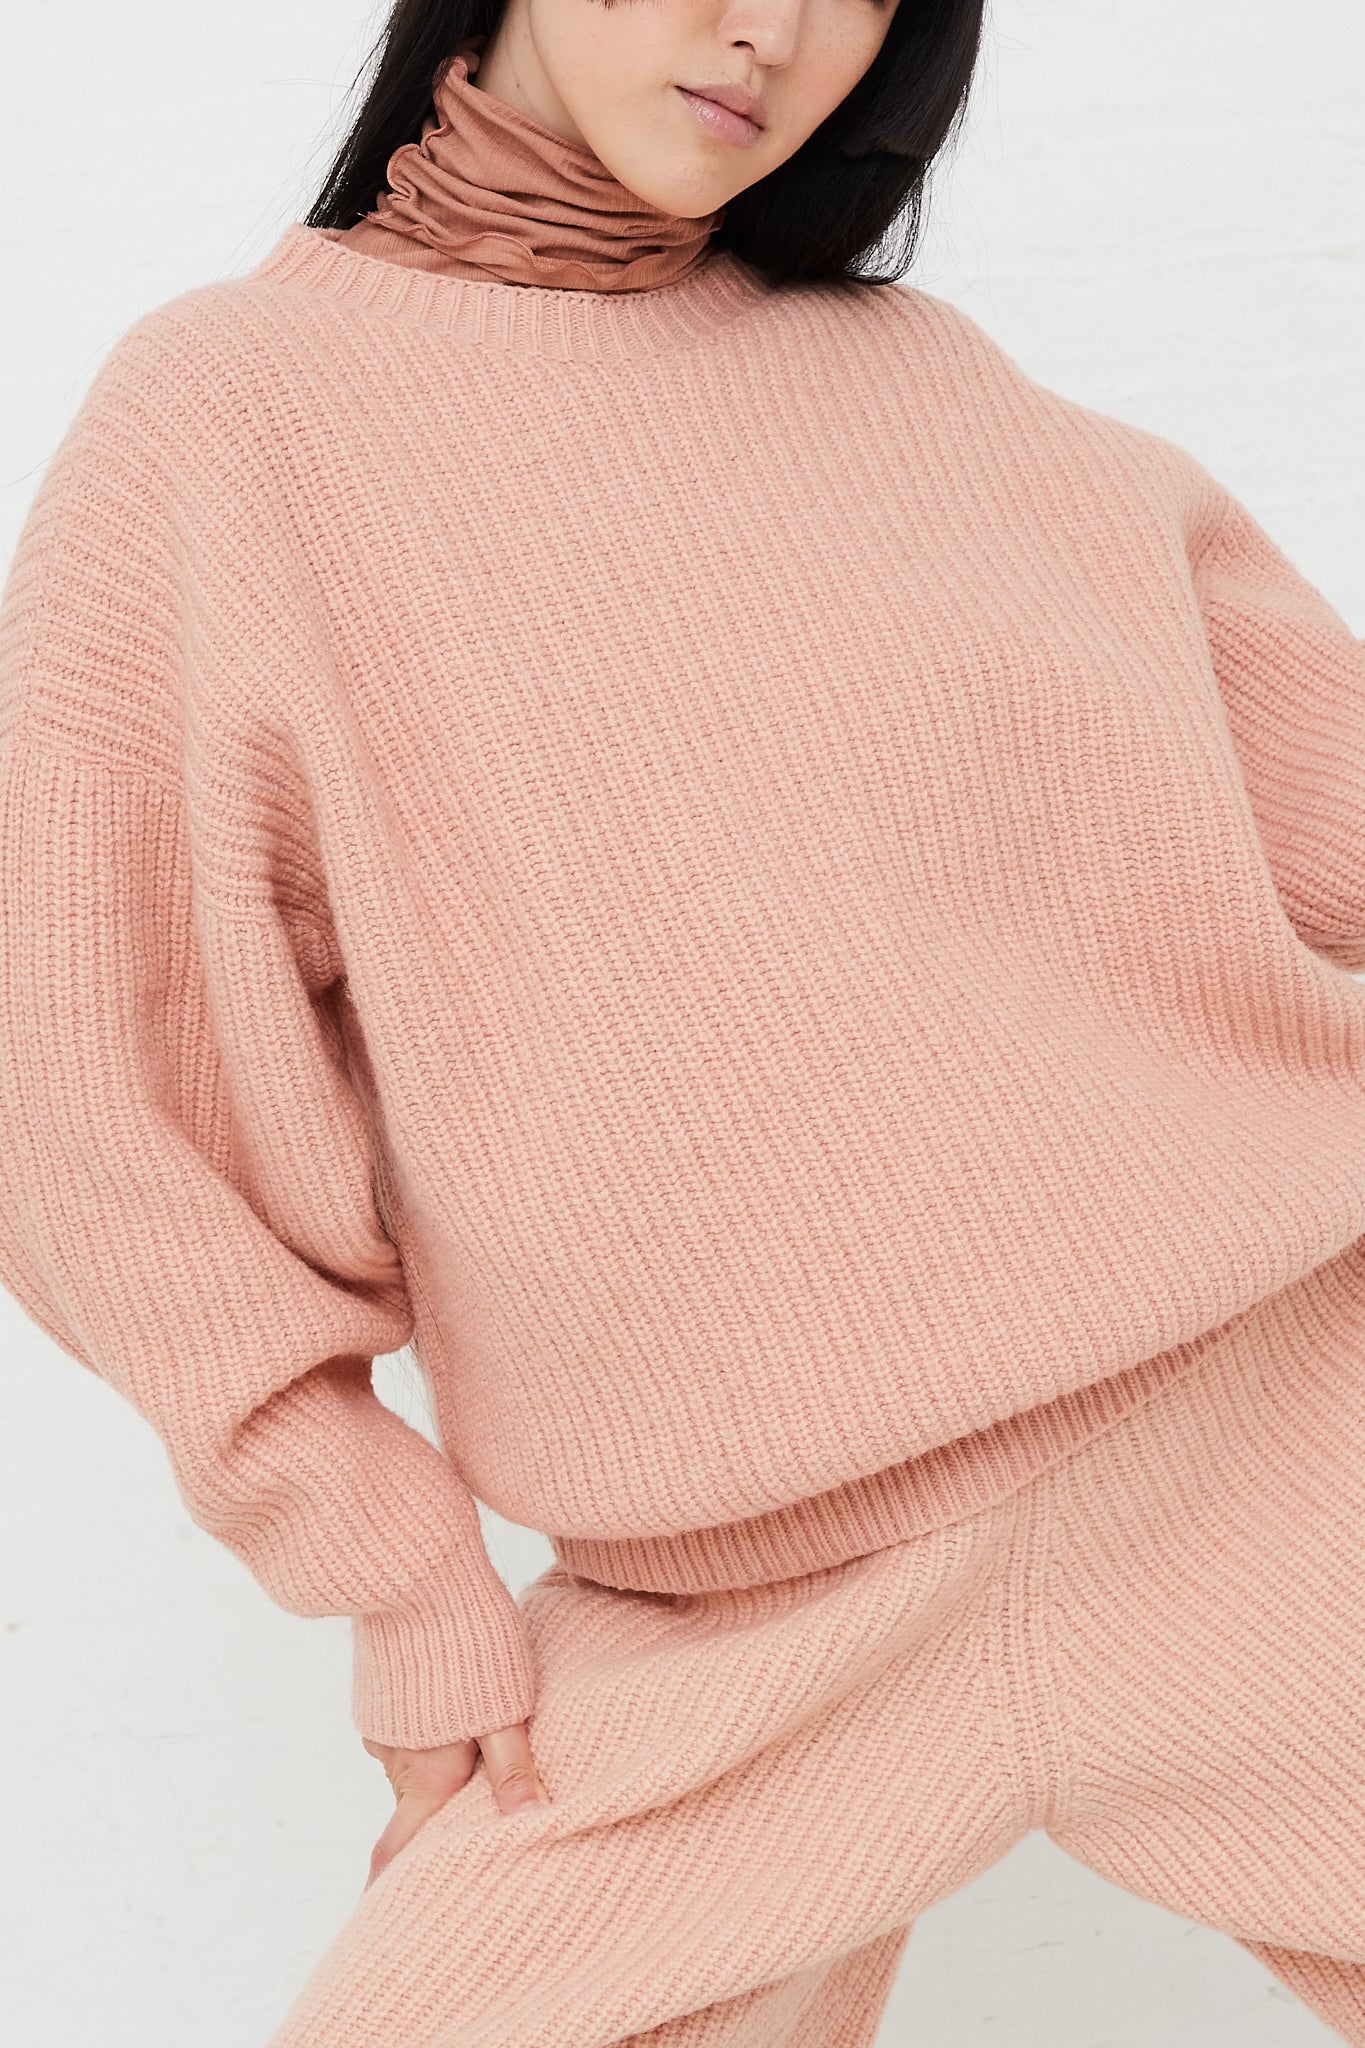 Mea Crew Neck Pullover Sweater in Pink by Baserange for Oroboro Front Upclose